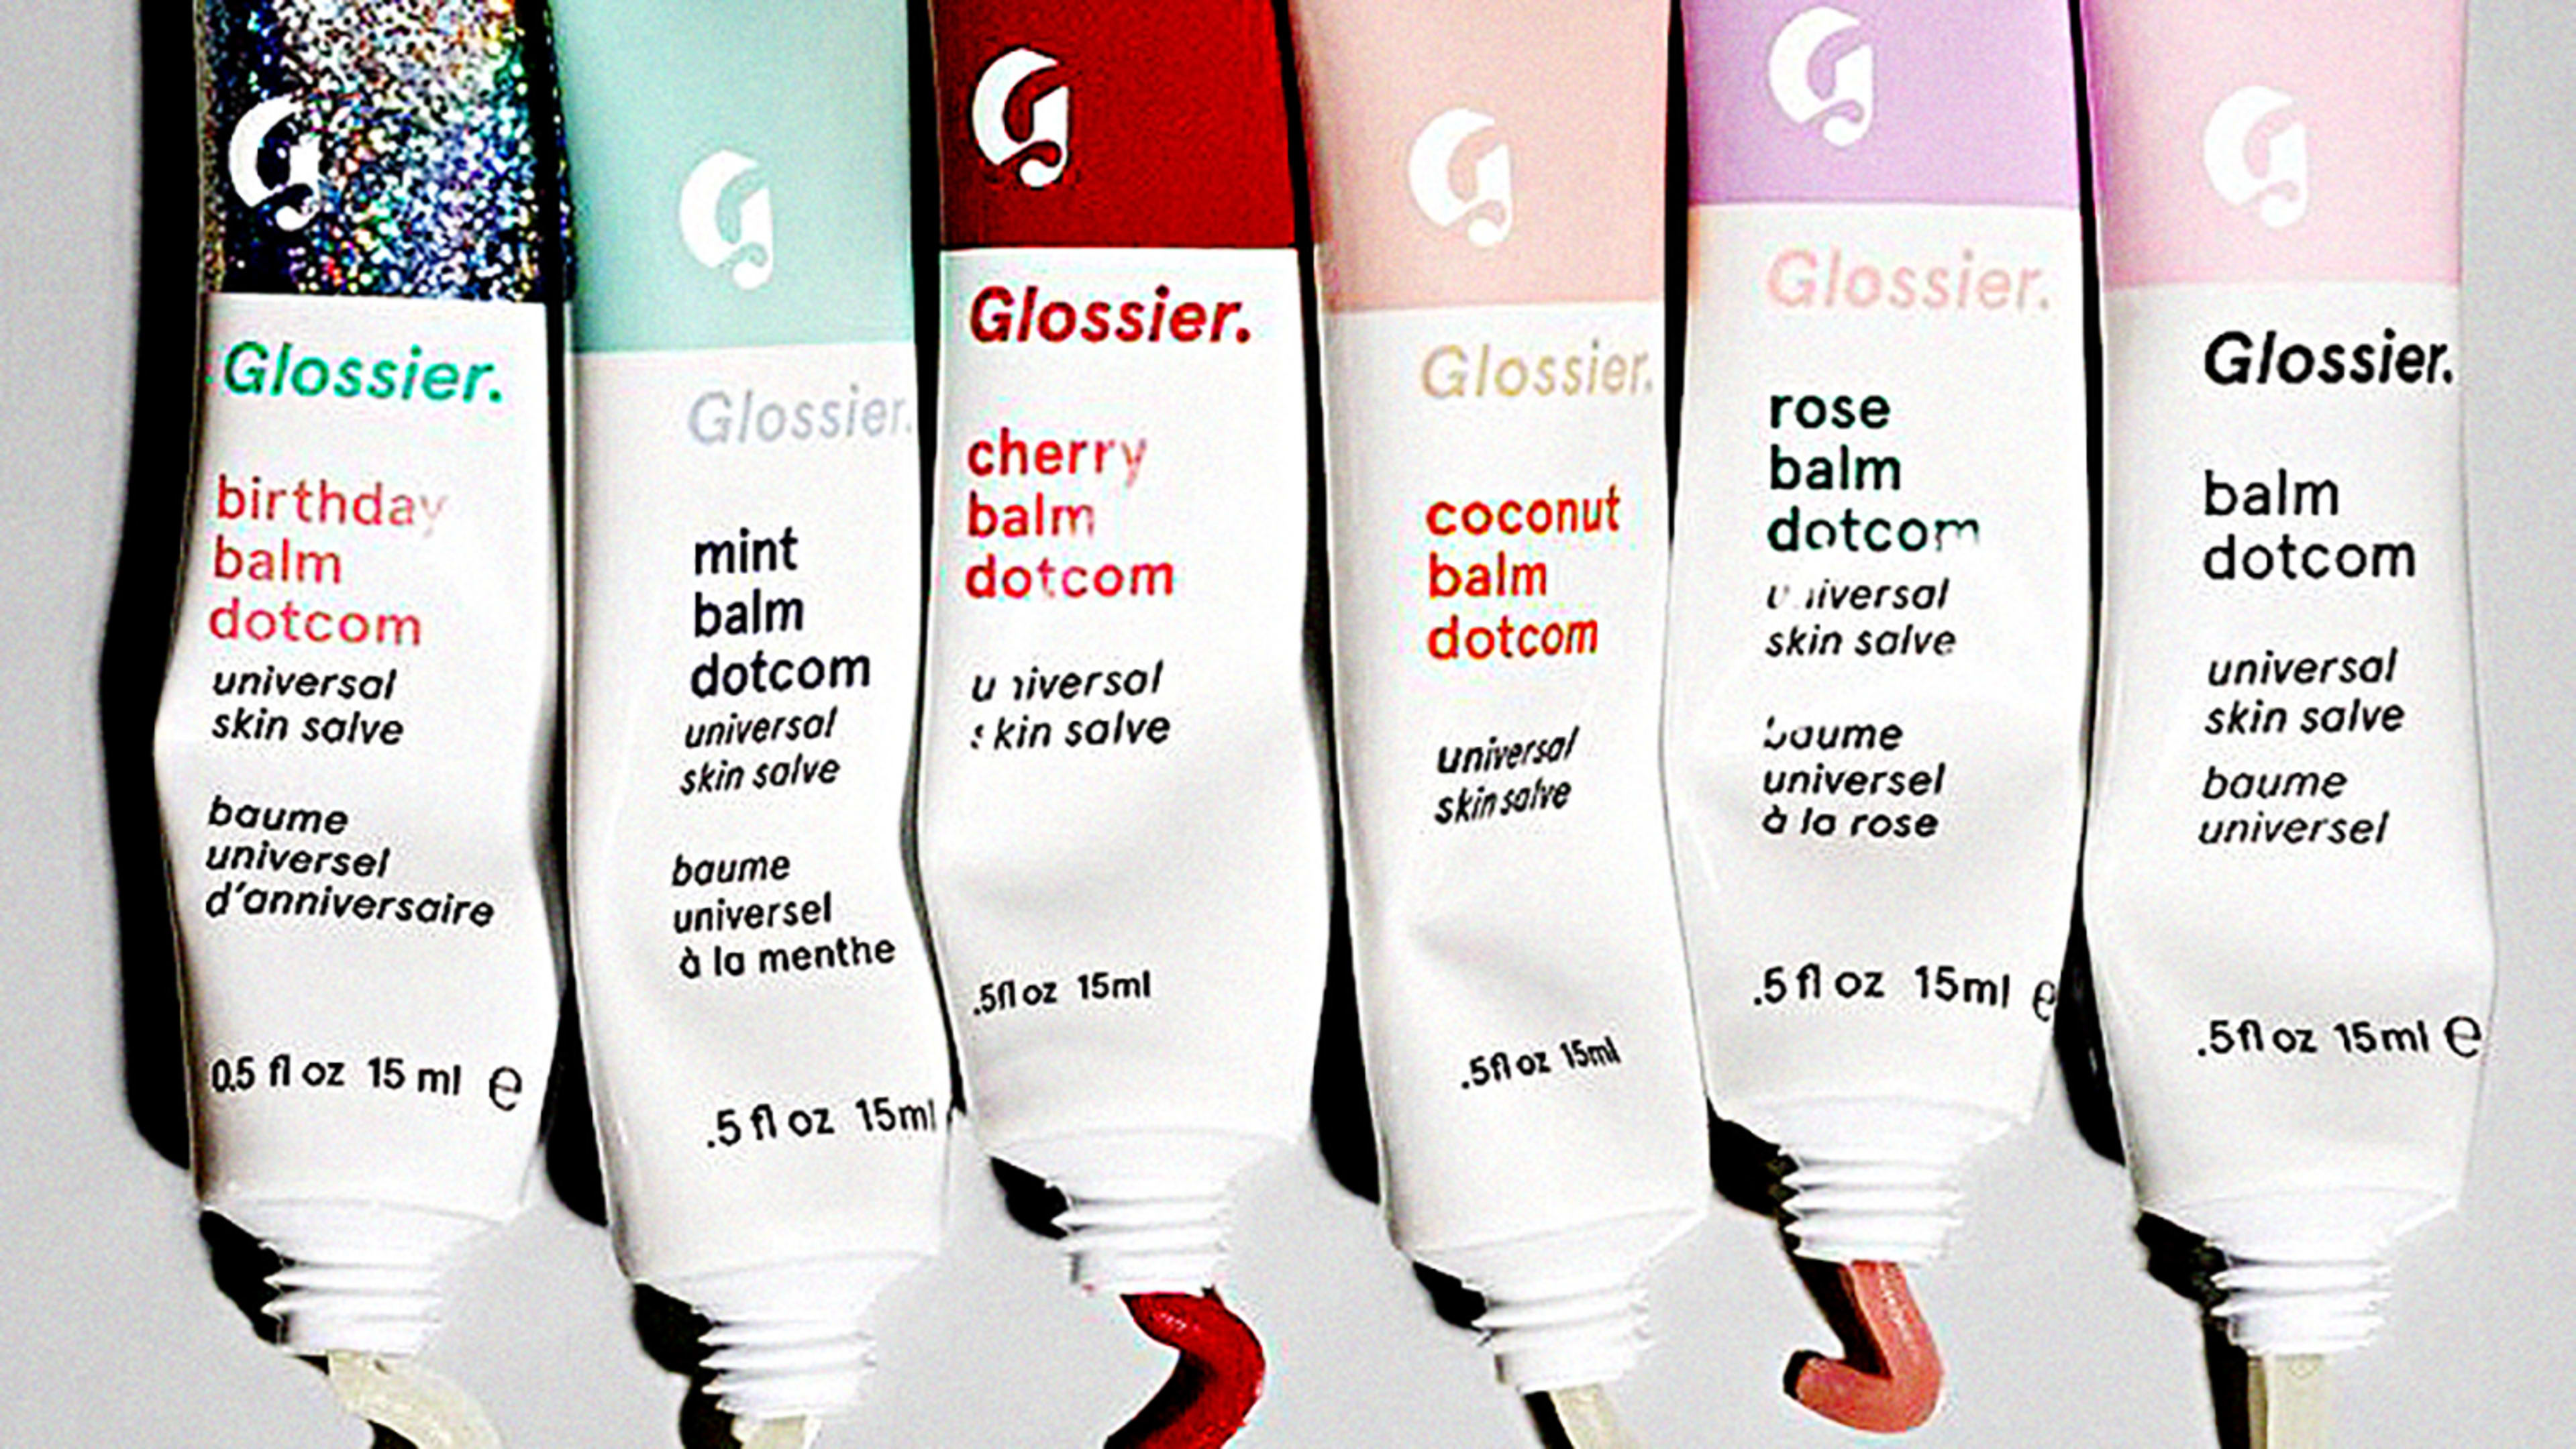 Glossier snags another $52 million in funding, in the name of customer experience